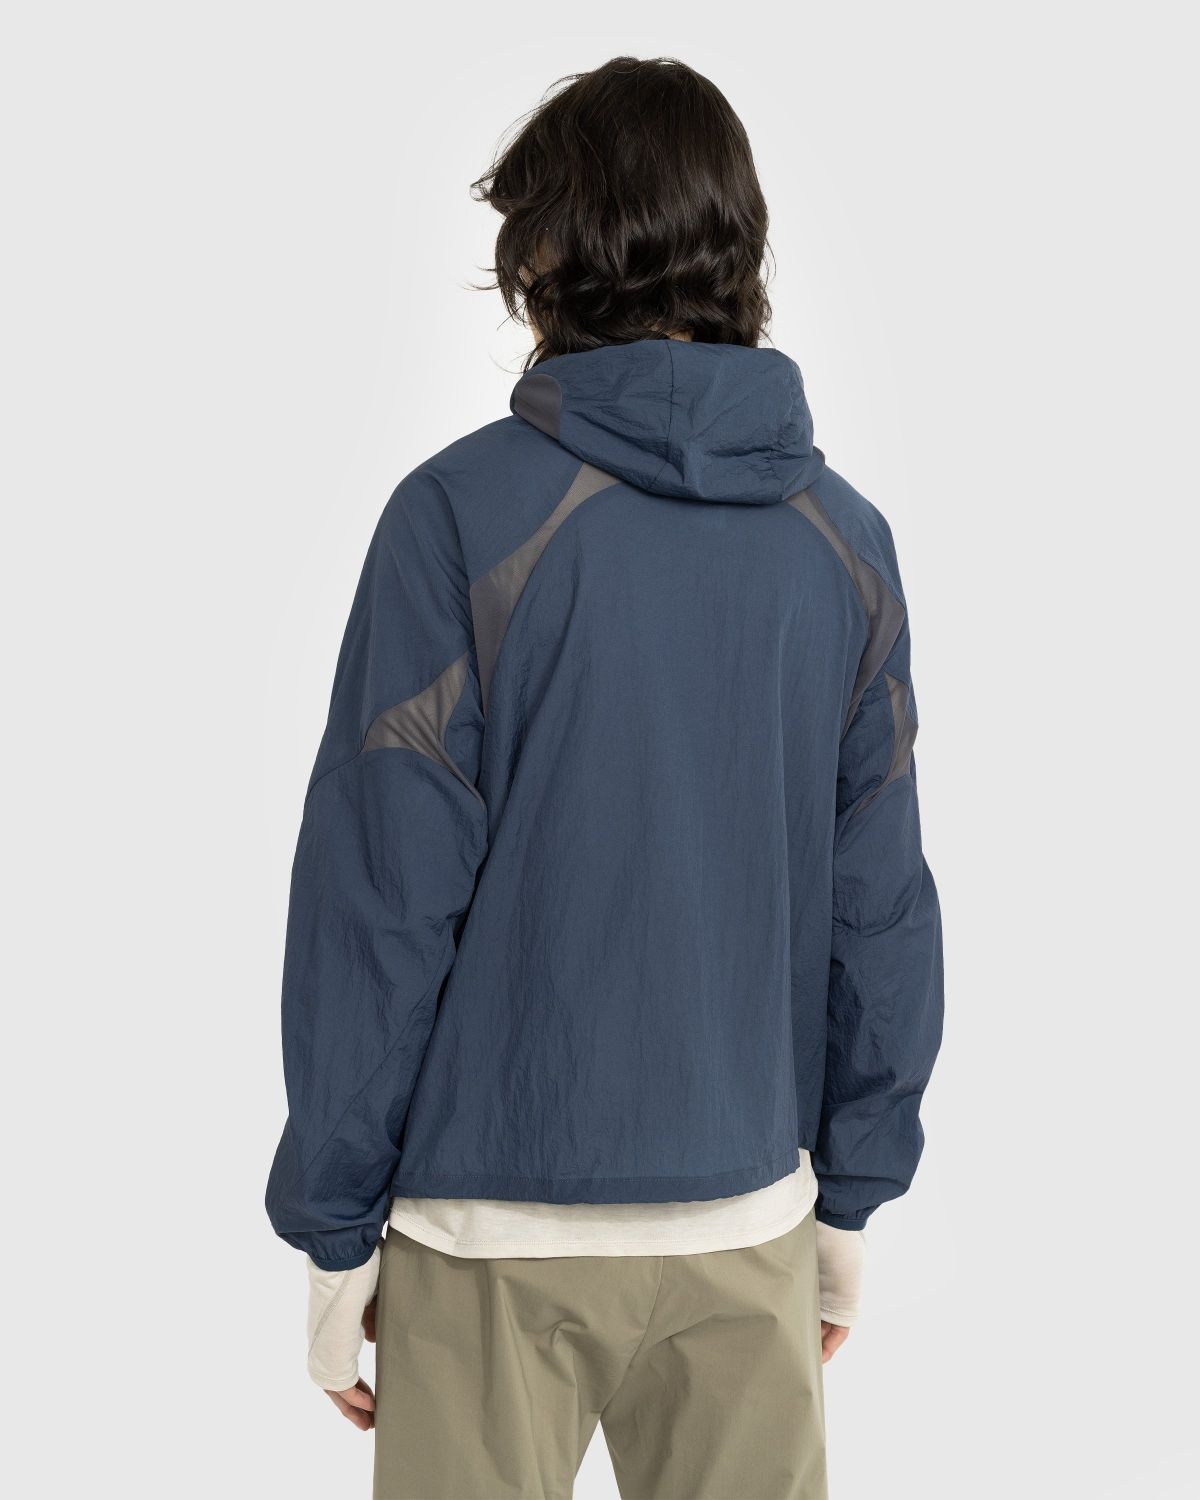 Post Archive Faction (PAF) – 5.0+ Technical Jacket Right Navy - 3